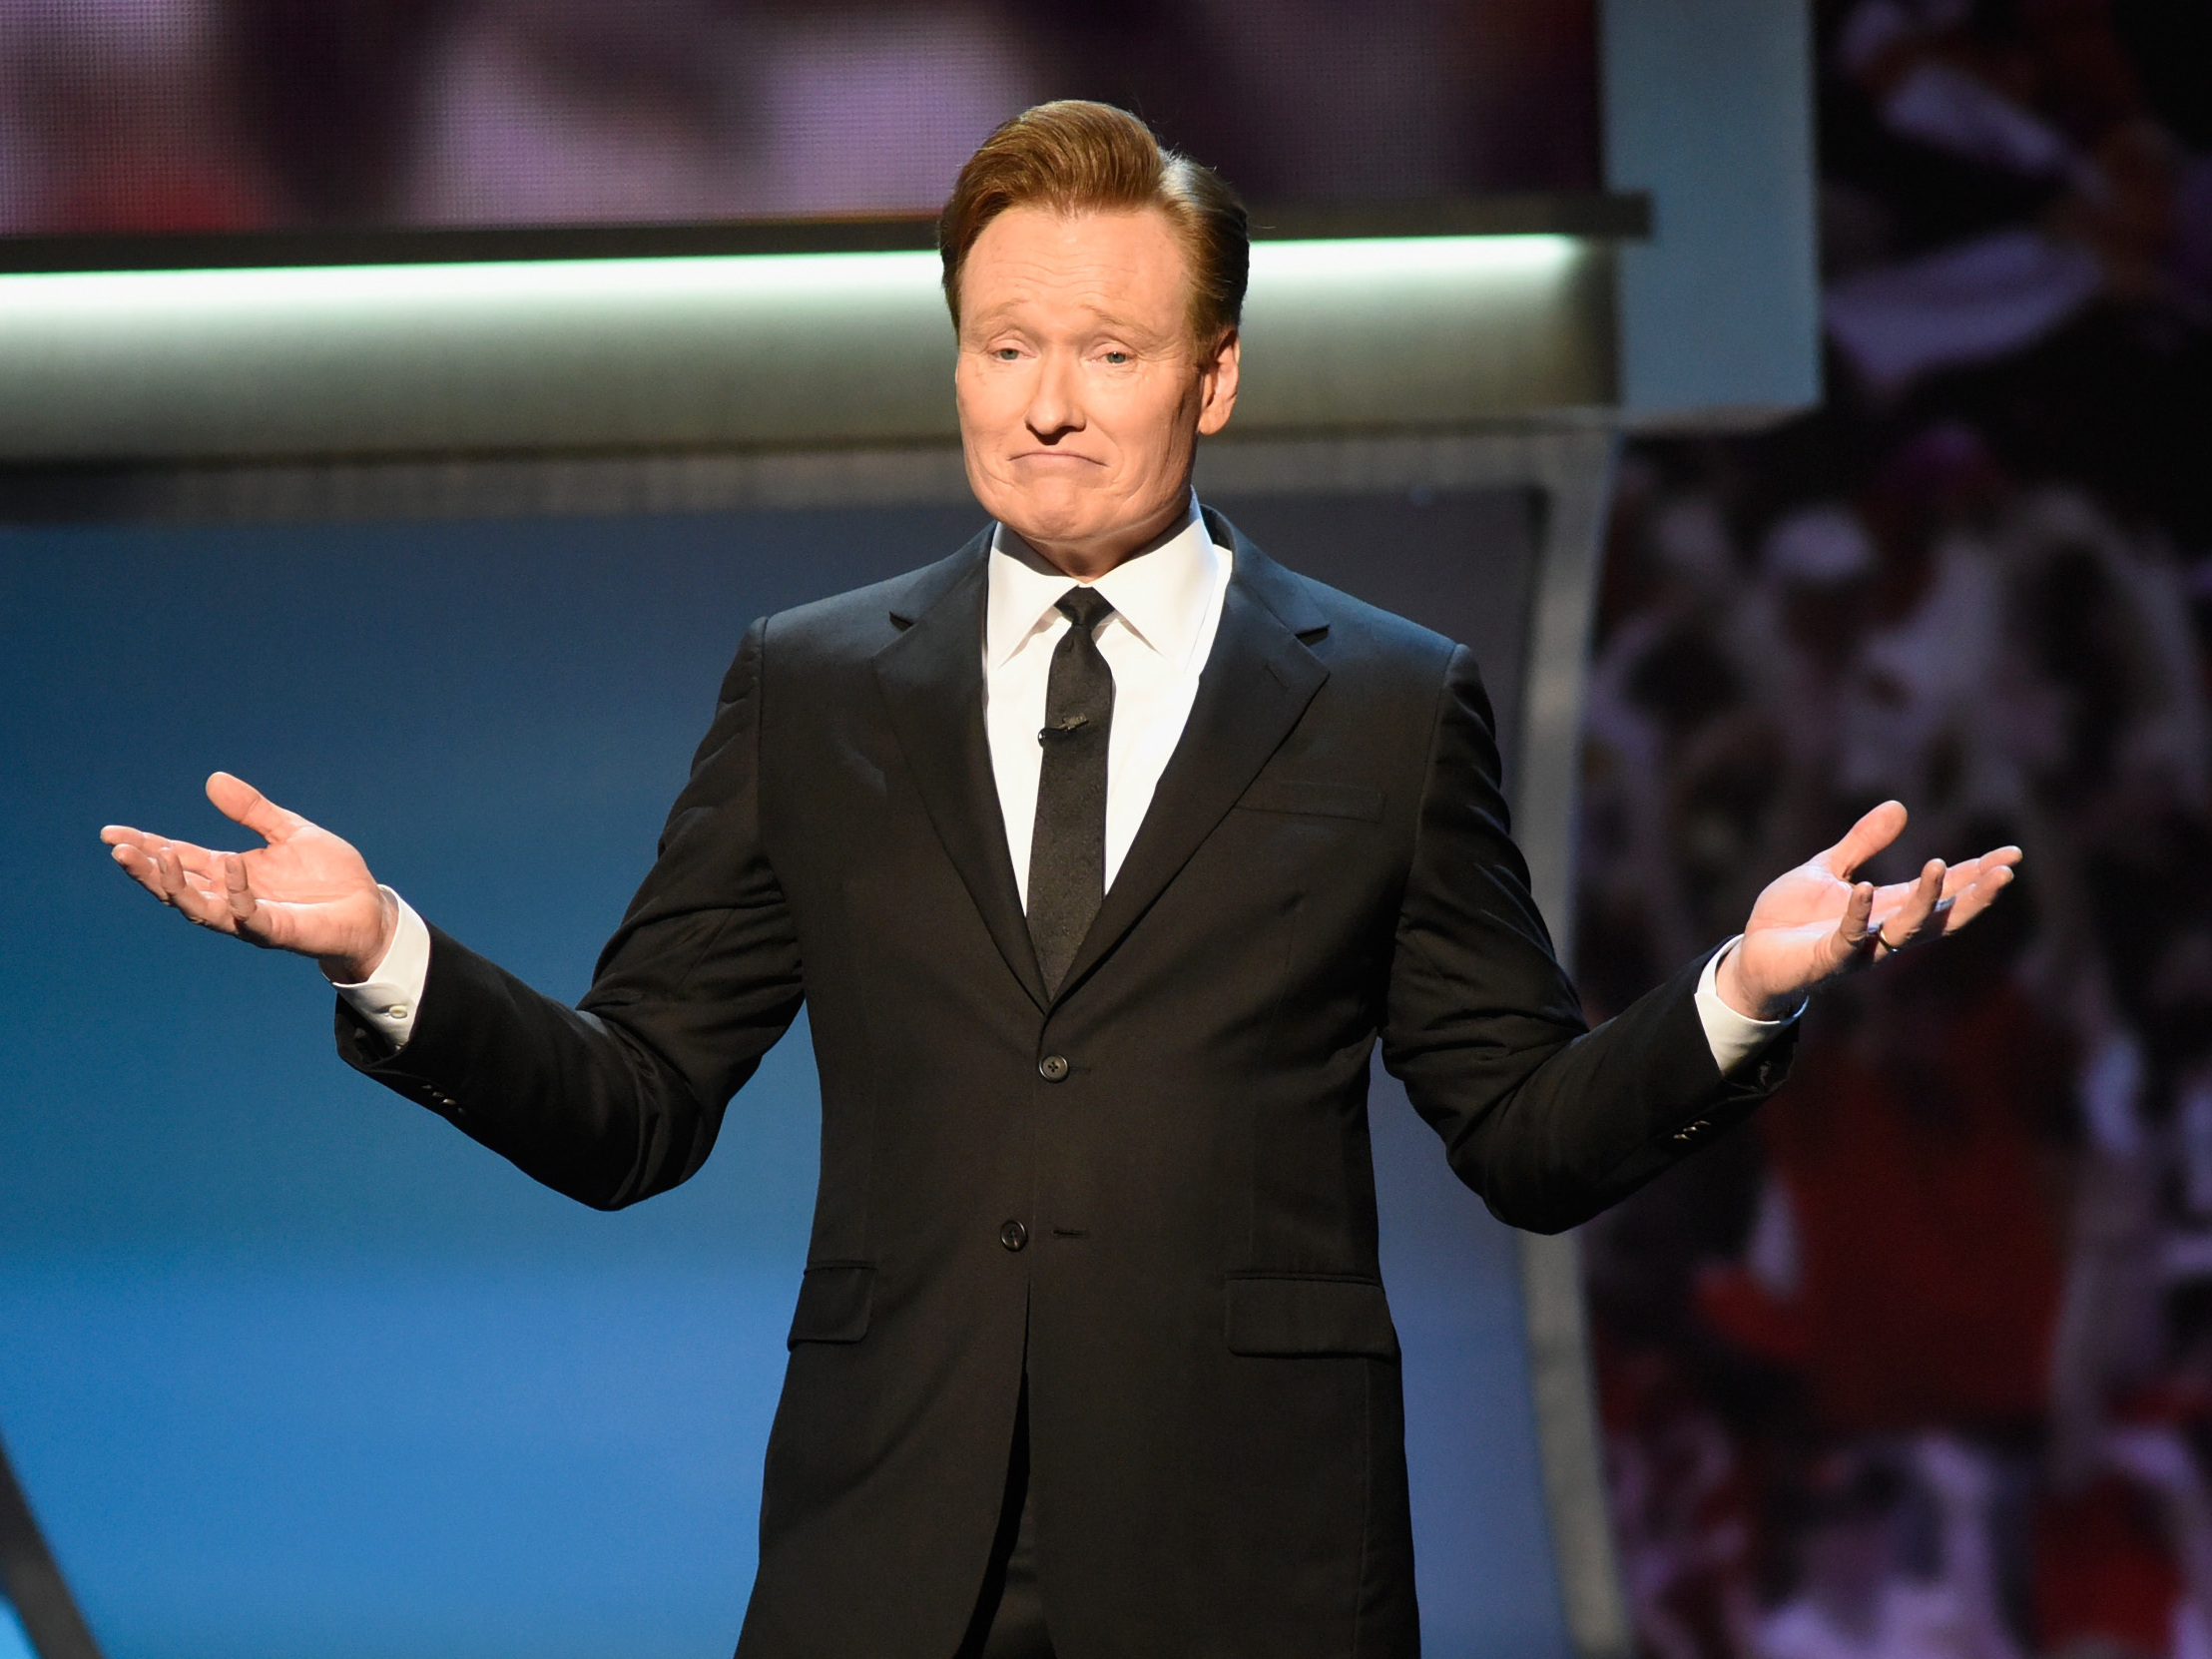 Host Conan O'Brien speaking onstage during the 5th Annual NFL Honors in San Francisco, Calif.